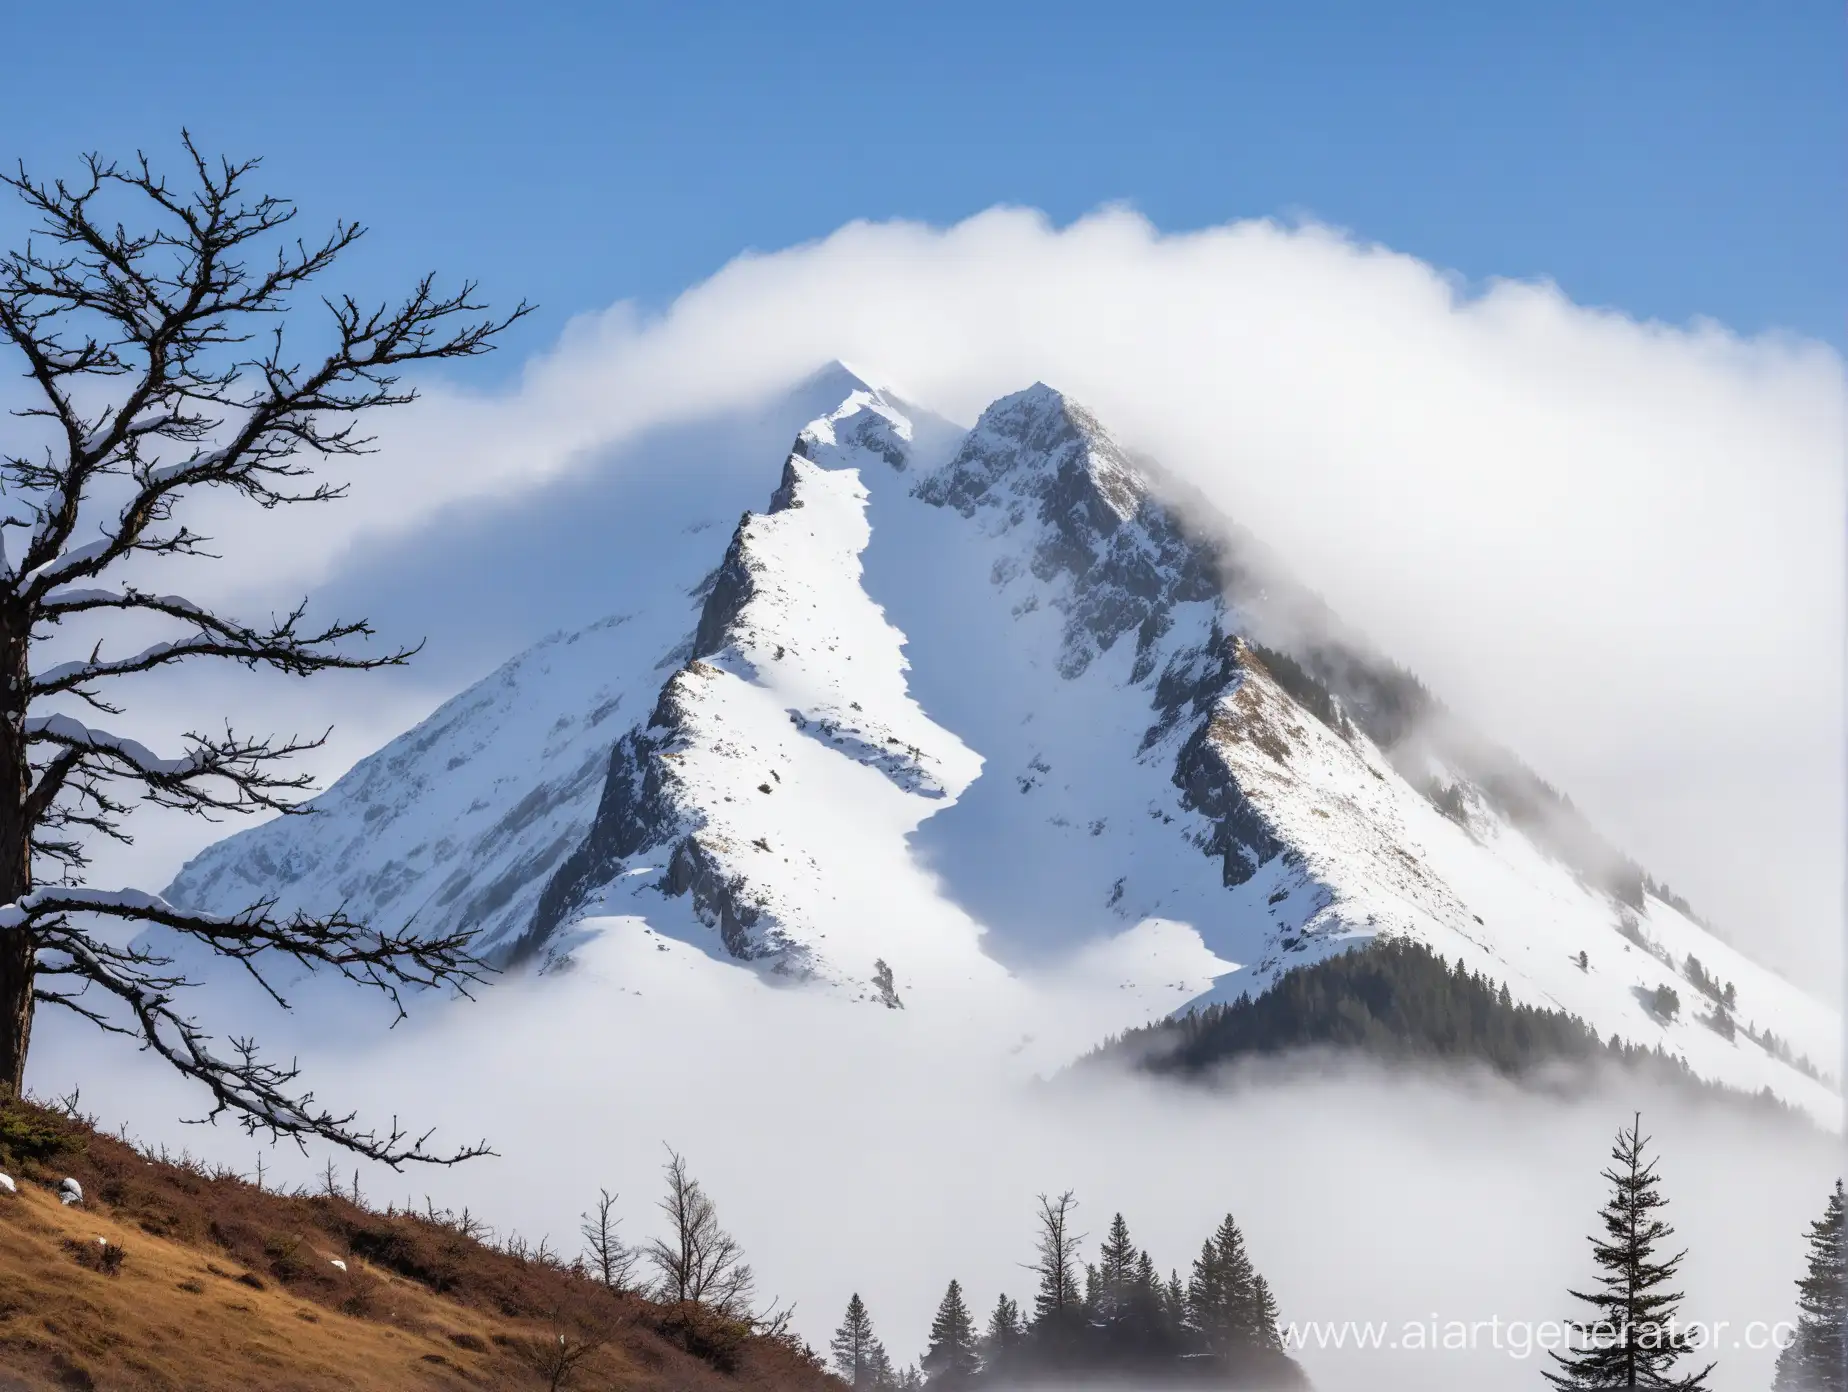 Snowy-Mountain-Summit-with-Foggy-Foreground-and-Lush-Trees